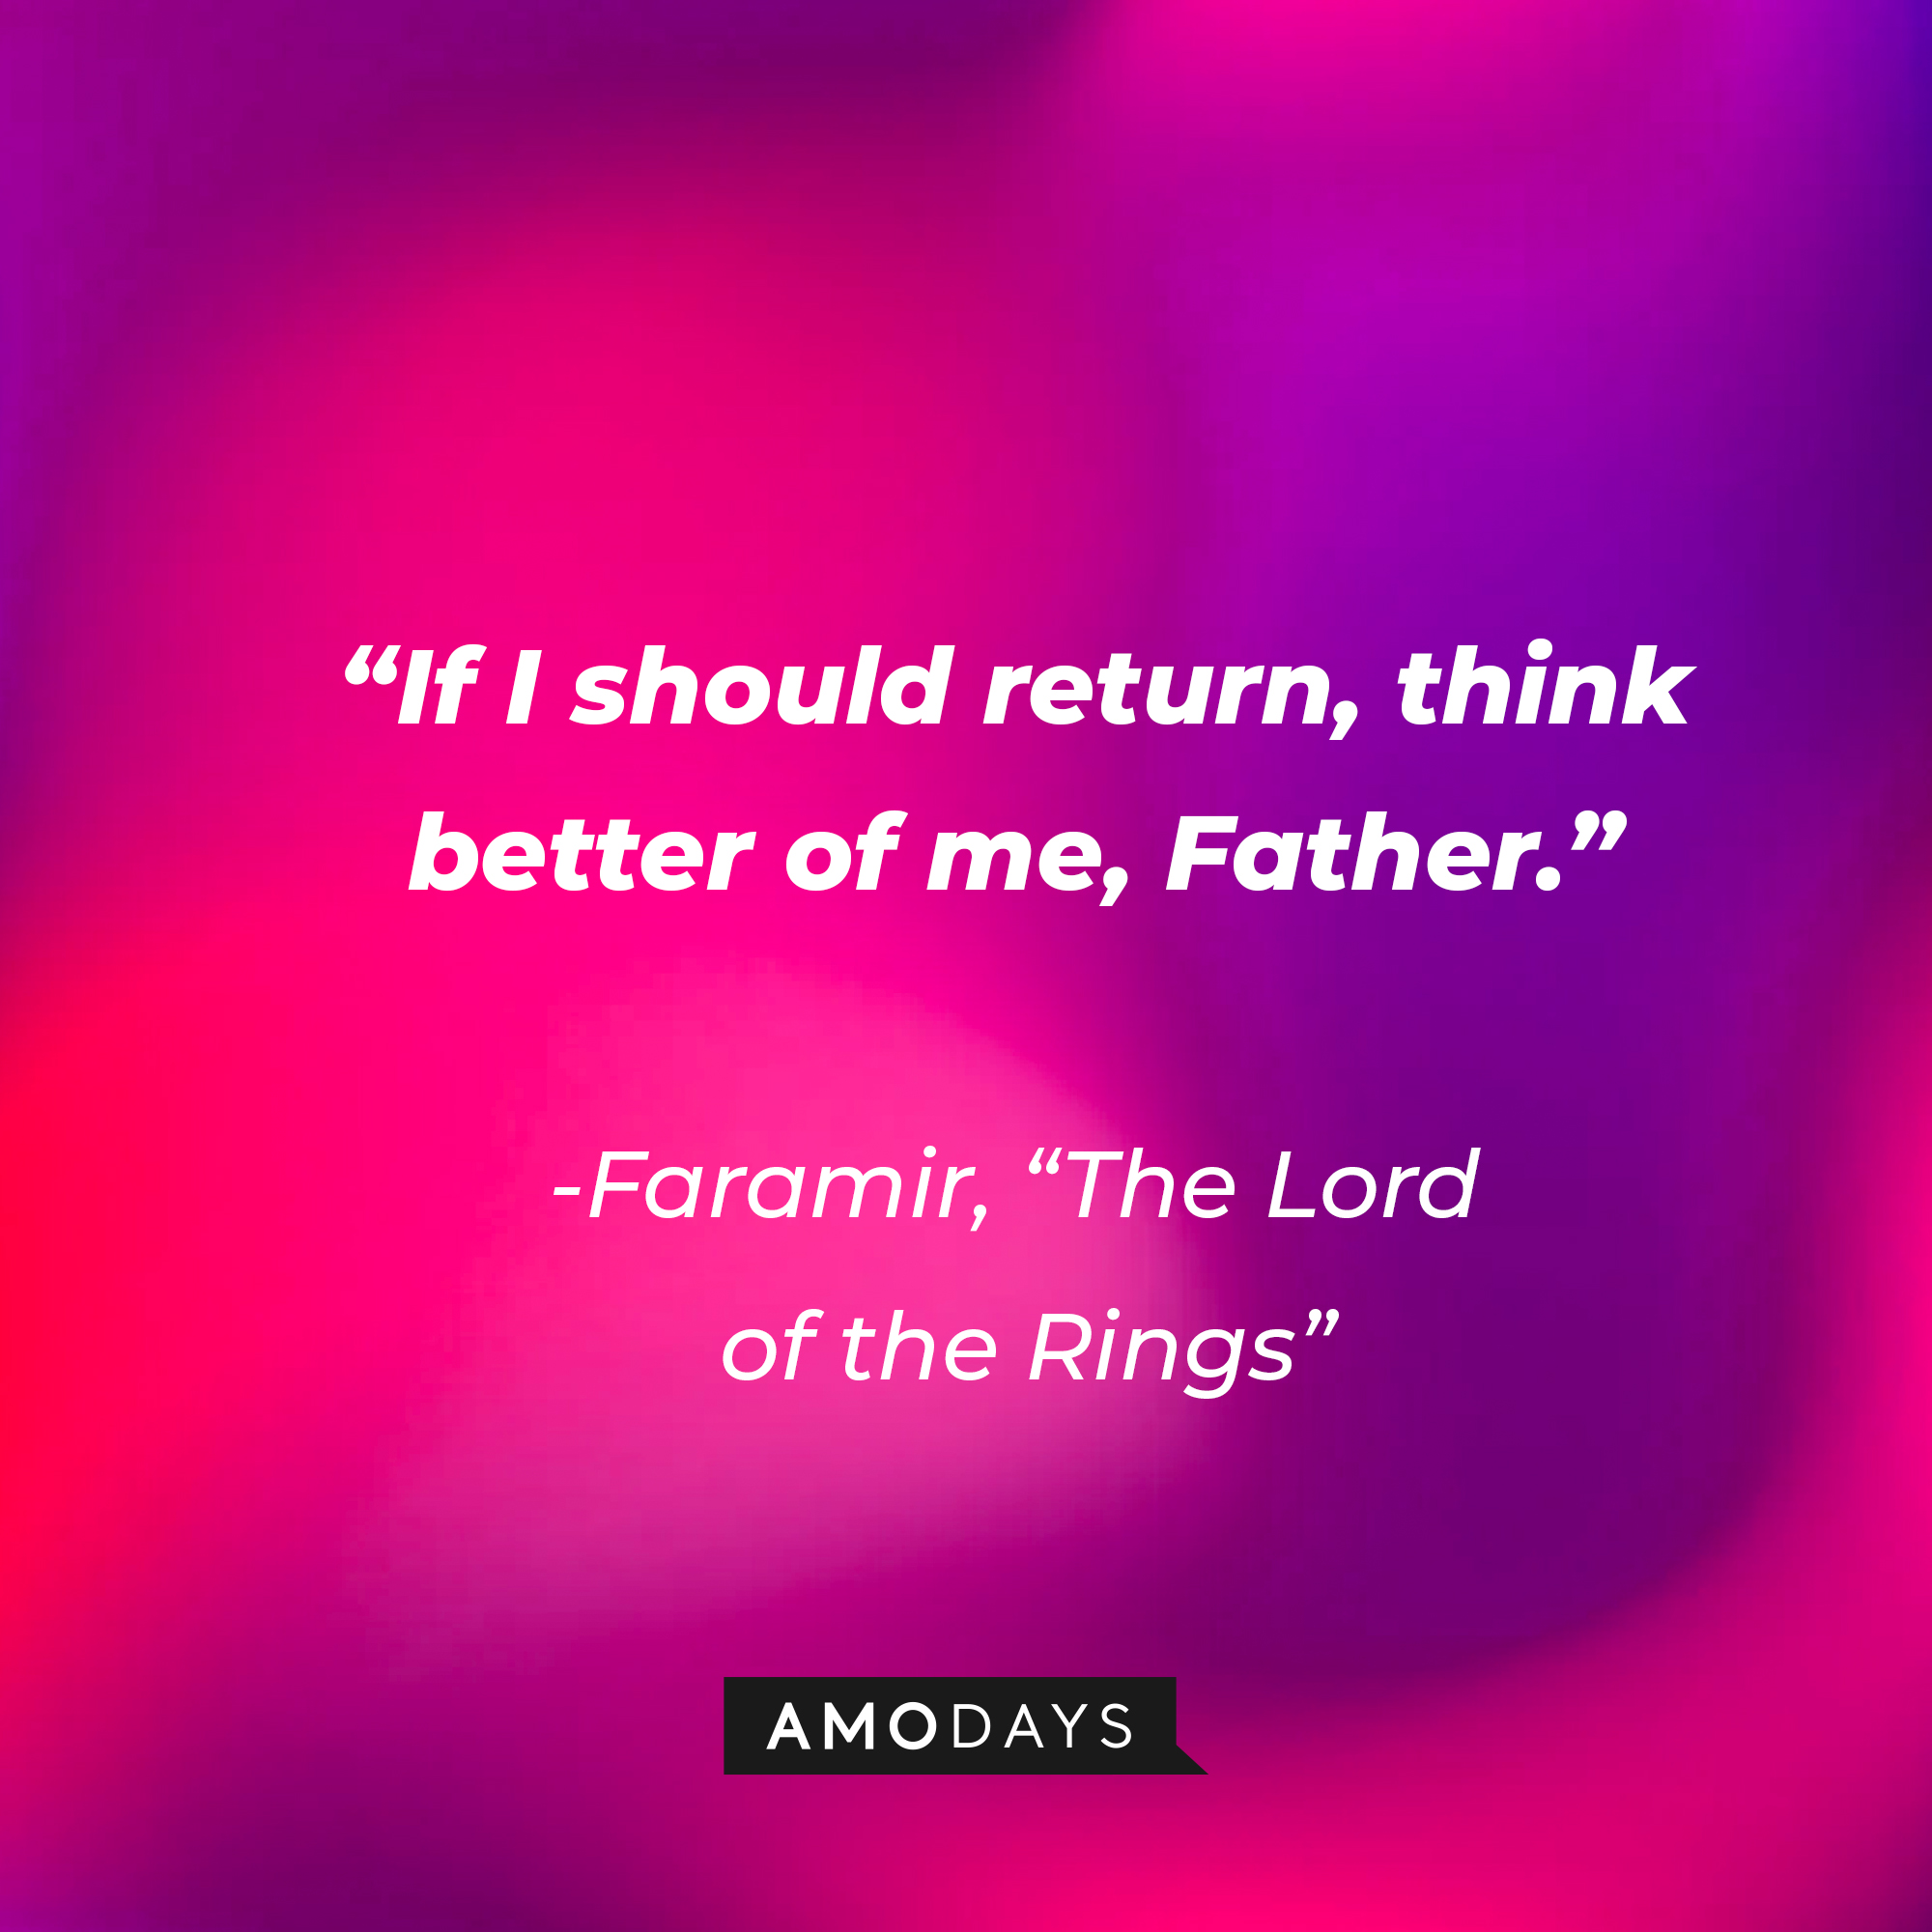 Faramir's quote from "The Lord of the Rings": "If I should return, think better of me, Father." | Source: AmoDays